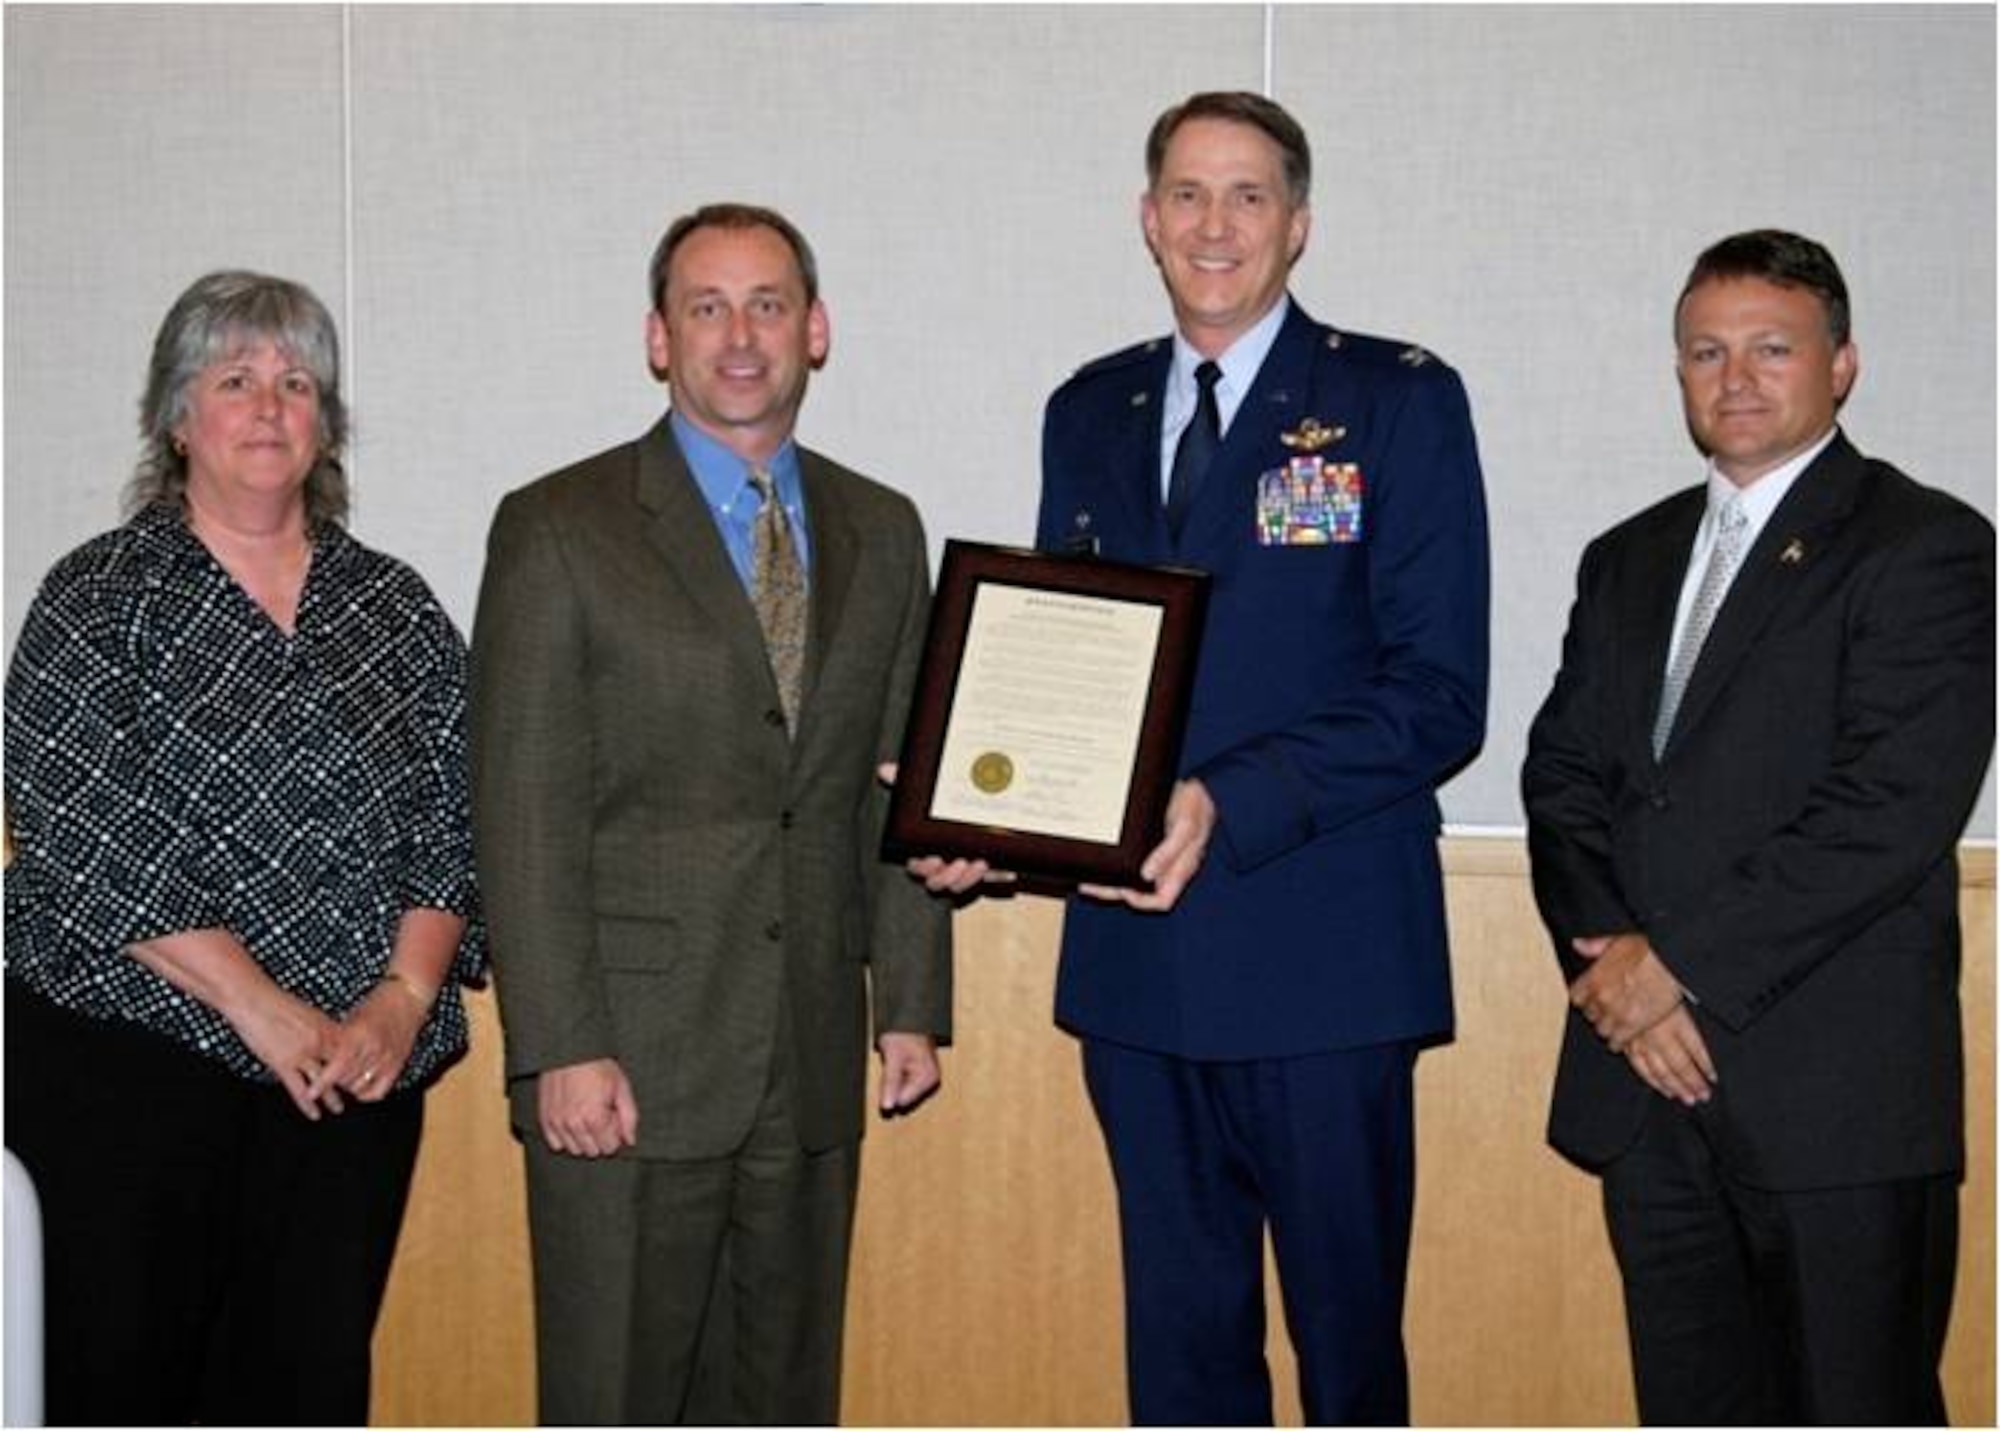 Spokane County District 3 Commissioner Bonnie Mager, District 1 Commissioner Todd Mielke, 141 Air Refueling Wing Commander Col. Greg Bulkley and District 2 Commissioner Mark Richard stand with the proclamation certificate recognizing the month of August 2009 as Washington Air National Guard Appreciation Month.